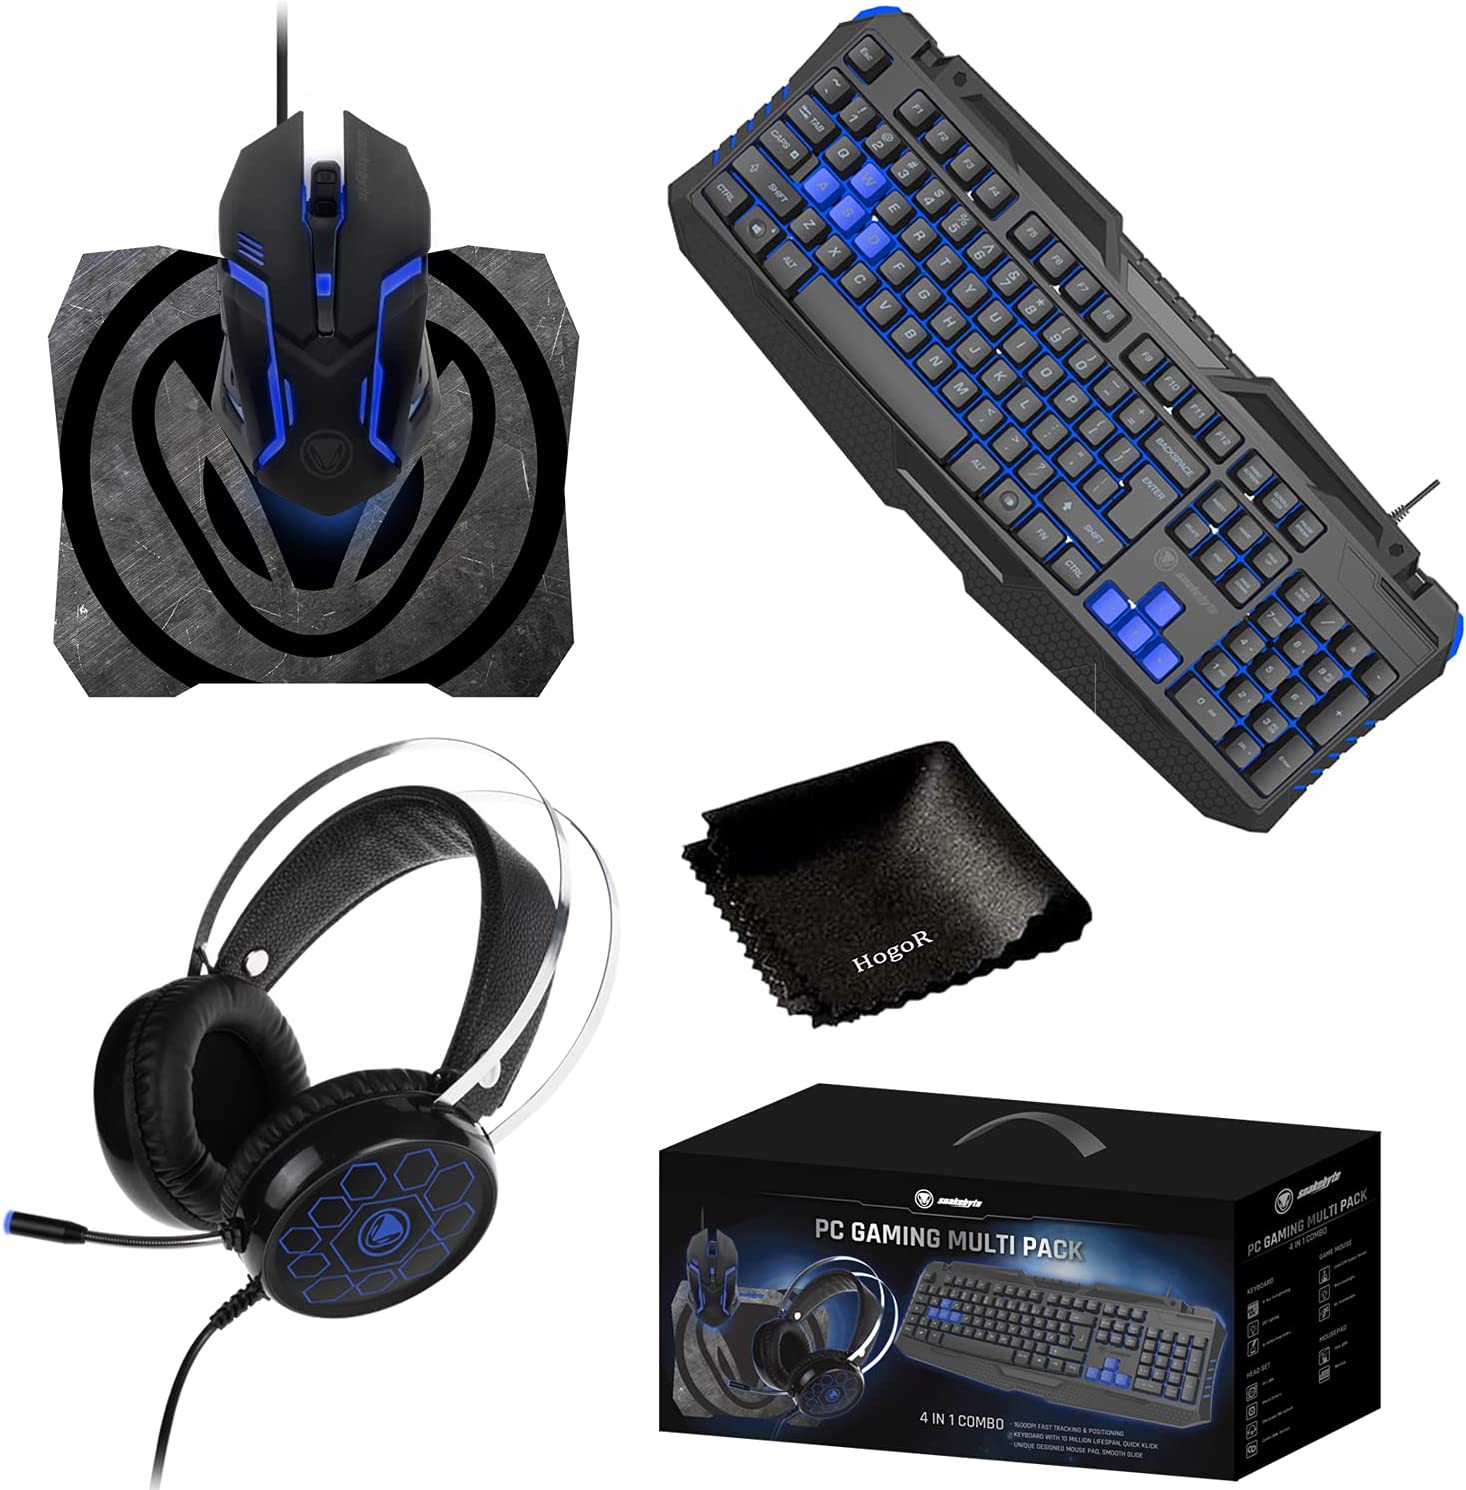 Snakebyte Keyboard And Mouse Combo With Mouse Pad, Gaming Headset Wire